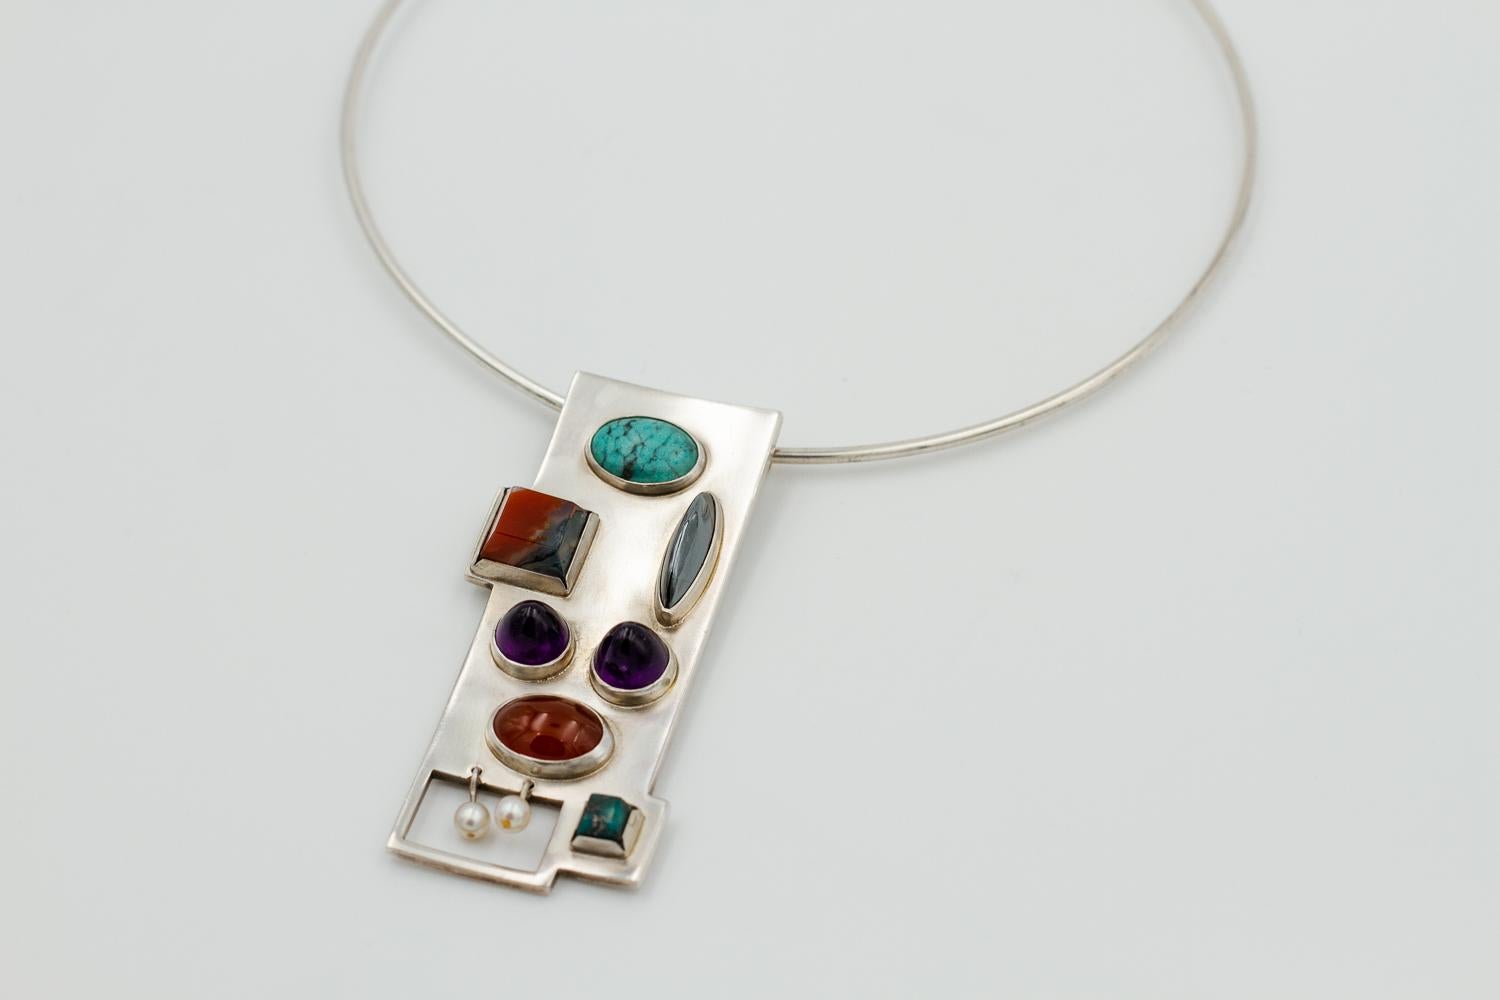 Very rare and unusual design.

Bent Knudsen; a rigid collar and modernist pendant
Sterling silver necklace, pendant set with cultured pearls, cabochon-cut turquoise, hematite, amethyst, carnelian and agate. 
Model #167
Rigid collar Diam 16 cm (6,3